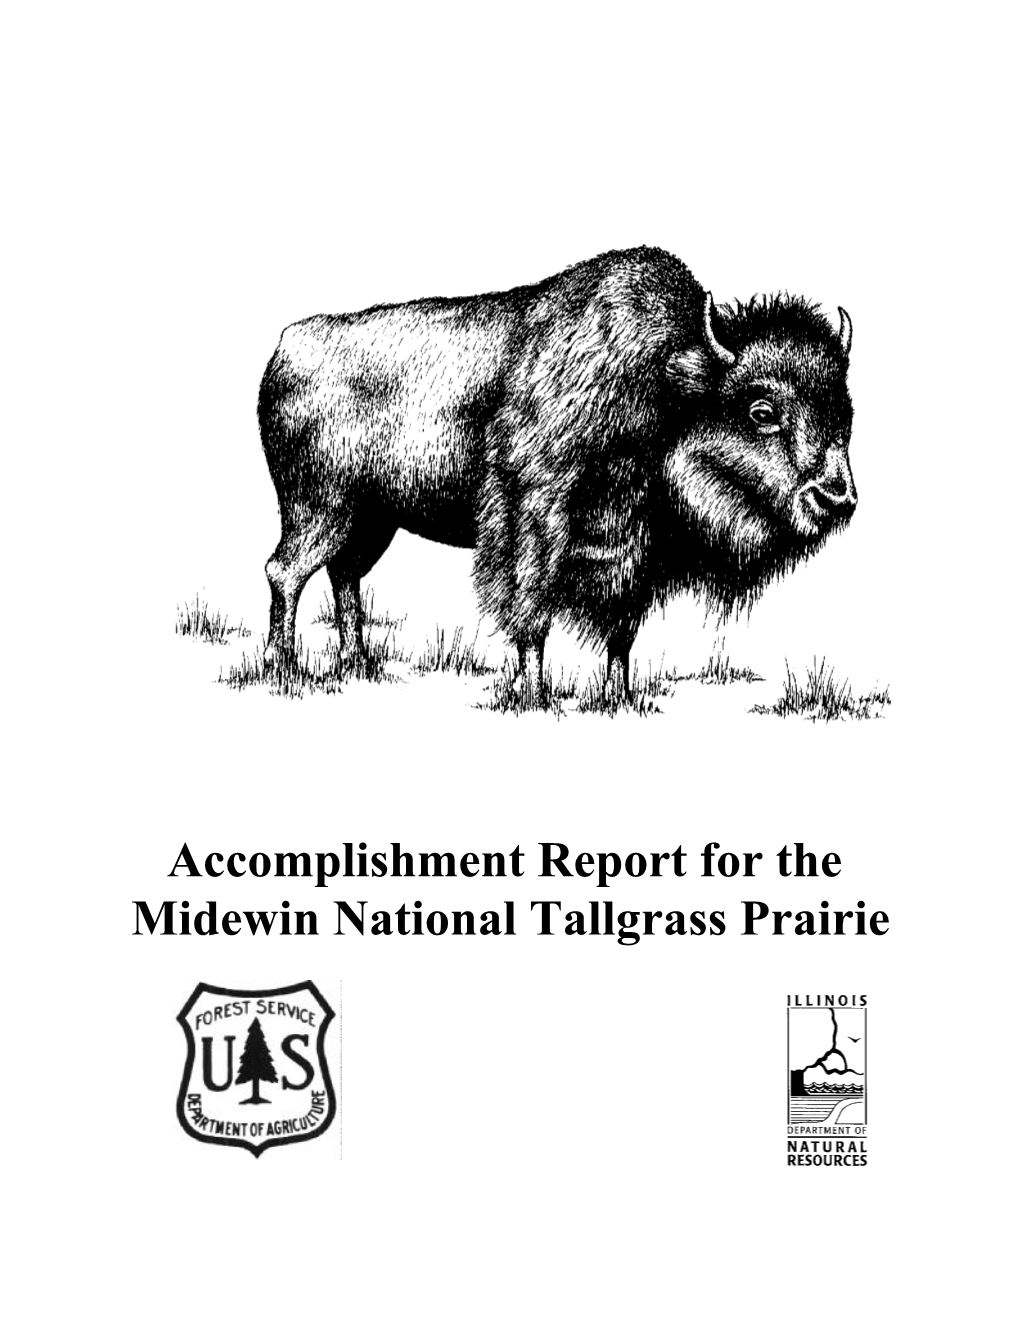 Accomplishment Report for the Midewin National Tallgrass Prairie Accomplishment Report for the Midewin National Tallgrass Prairie September 1, 1995 - August 31, 1996